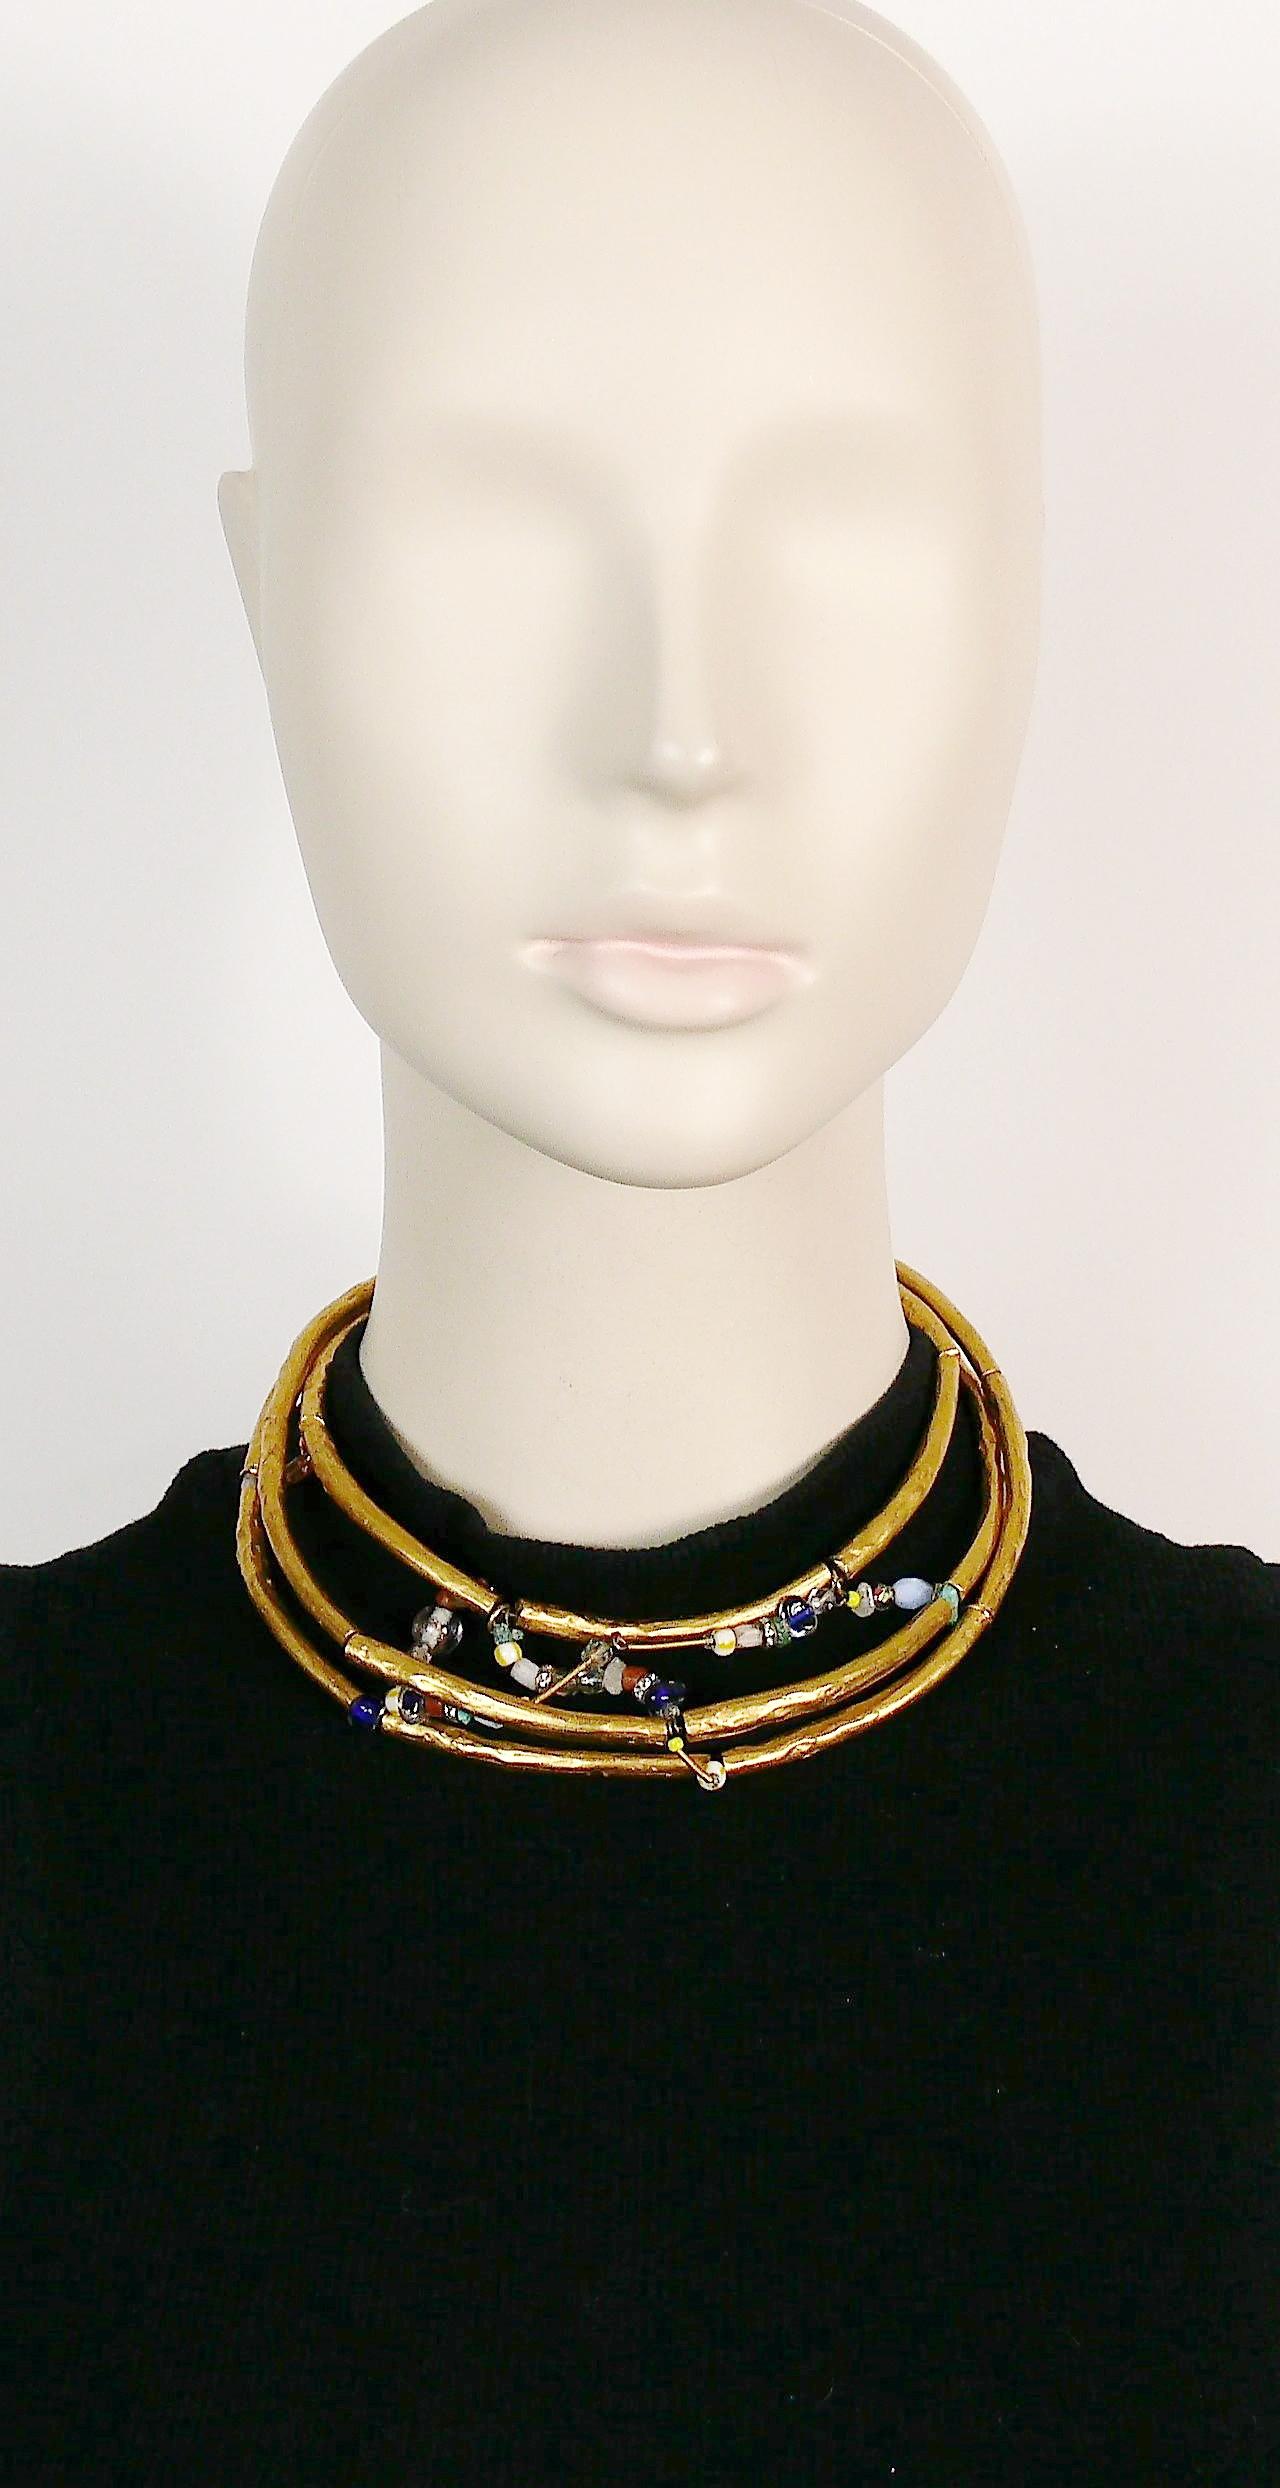 CHRISTIAN LACROIX vintage gold toned choker necklace featuring hammered rigid tubular sections embellished with glass beads, turquoise chips and clear crystal rondelles.

Hook clasp closure.

Marked CHRISTIAN LACROIX CL Made in France.

Indicative